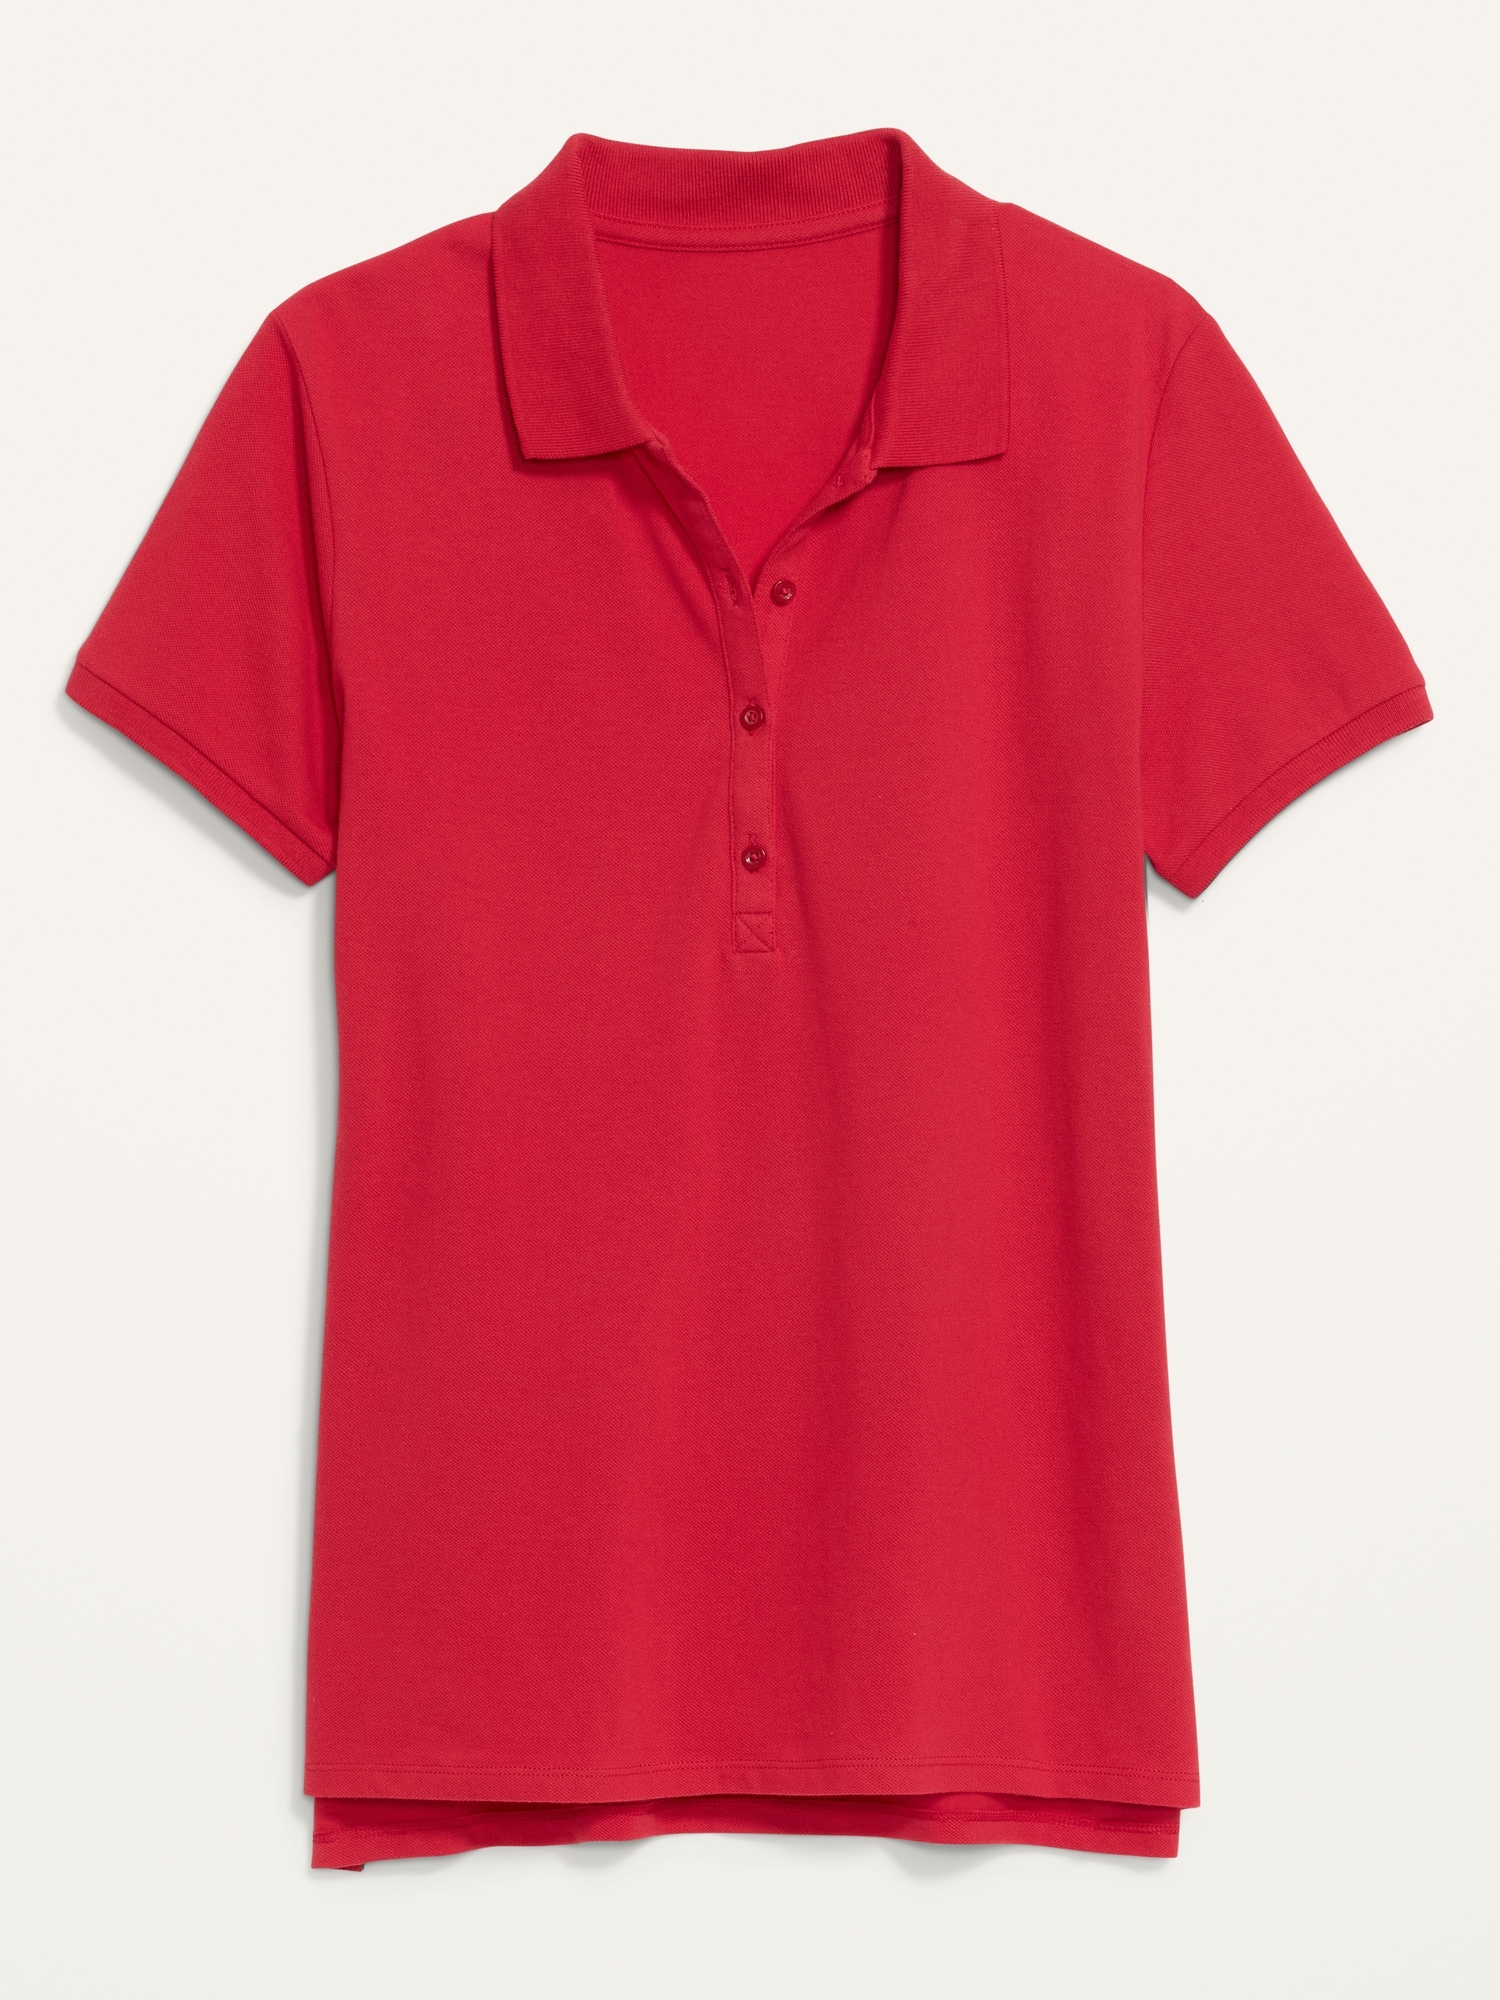 Uniform Pique Polo-Shirt for Girls in Many Colors!